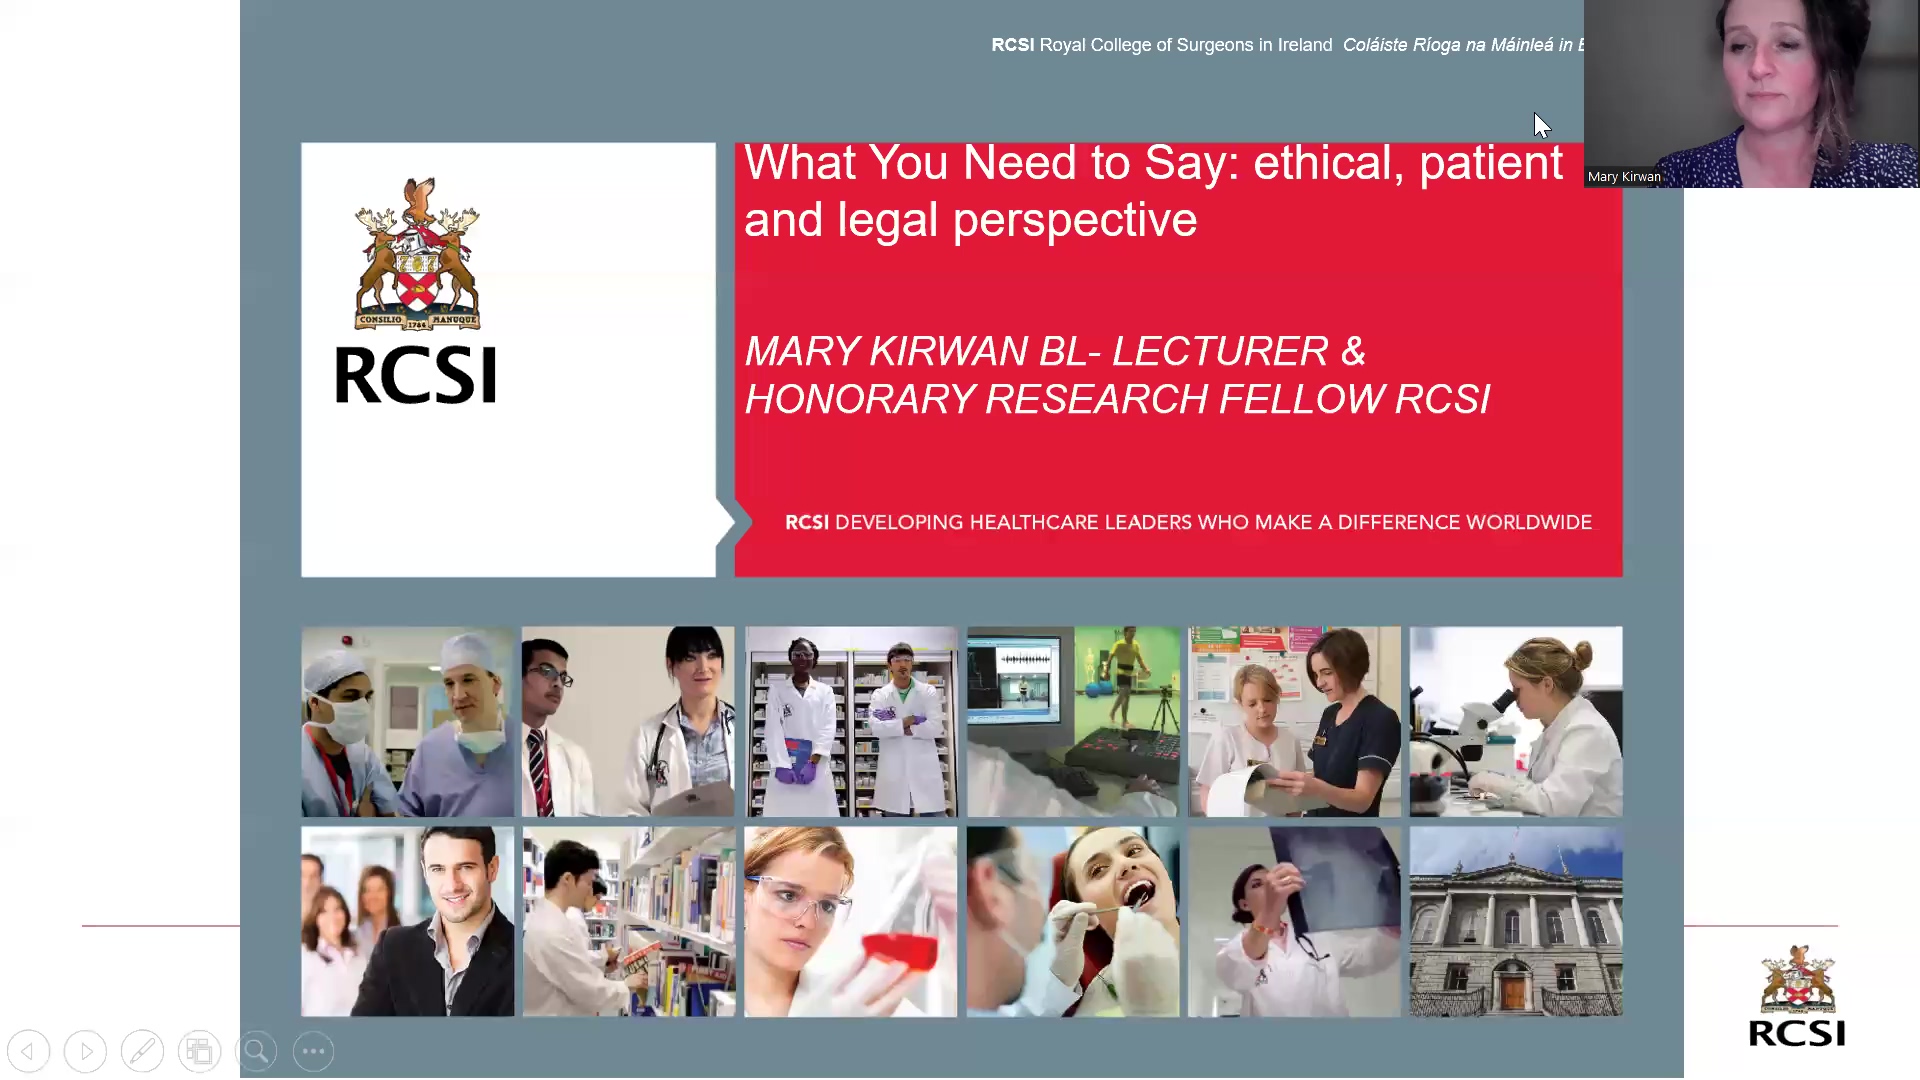 What you need to say: ethical, patient, and legal perspective